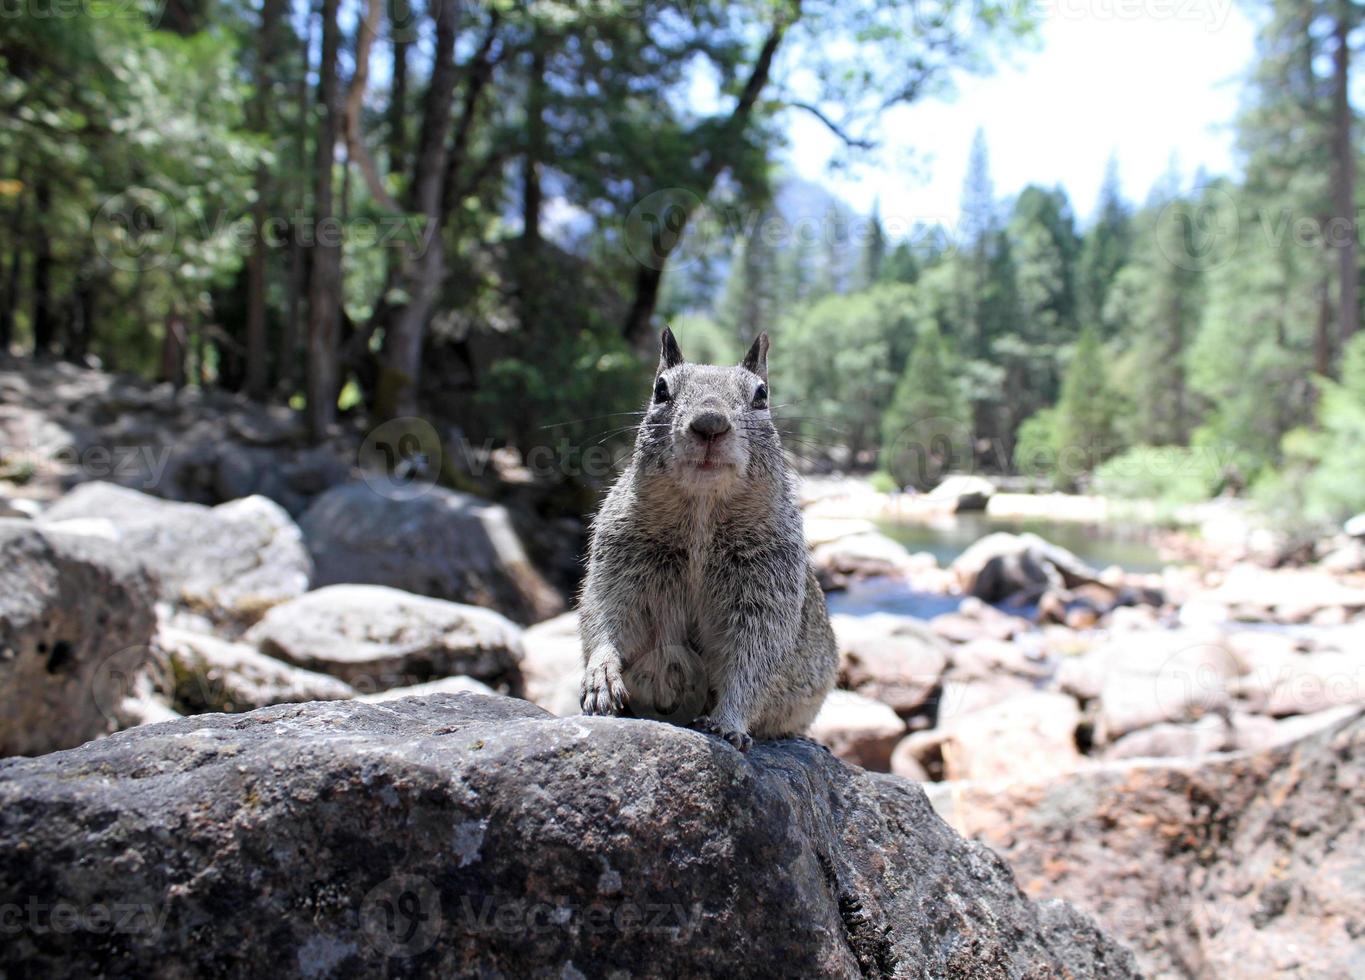 Cute and curious squirrel in Yosemite national park photo